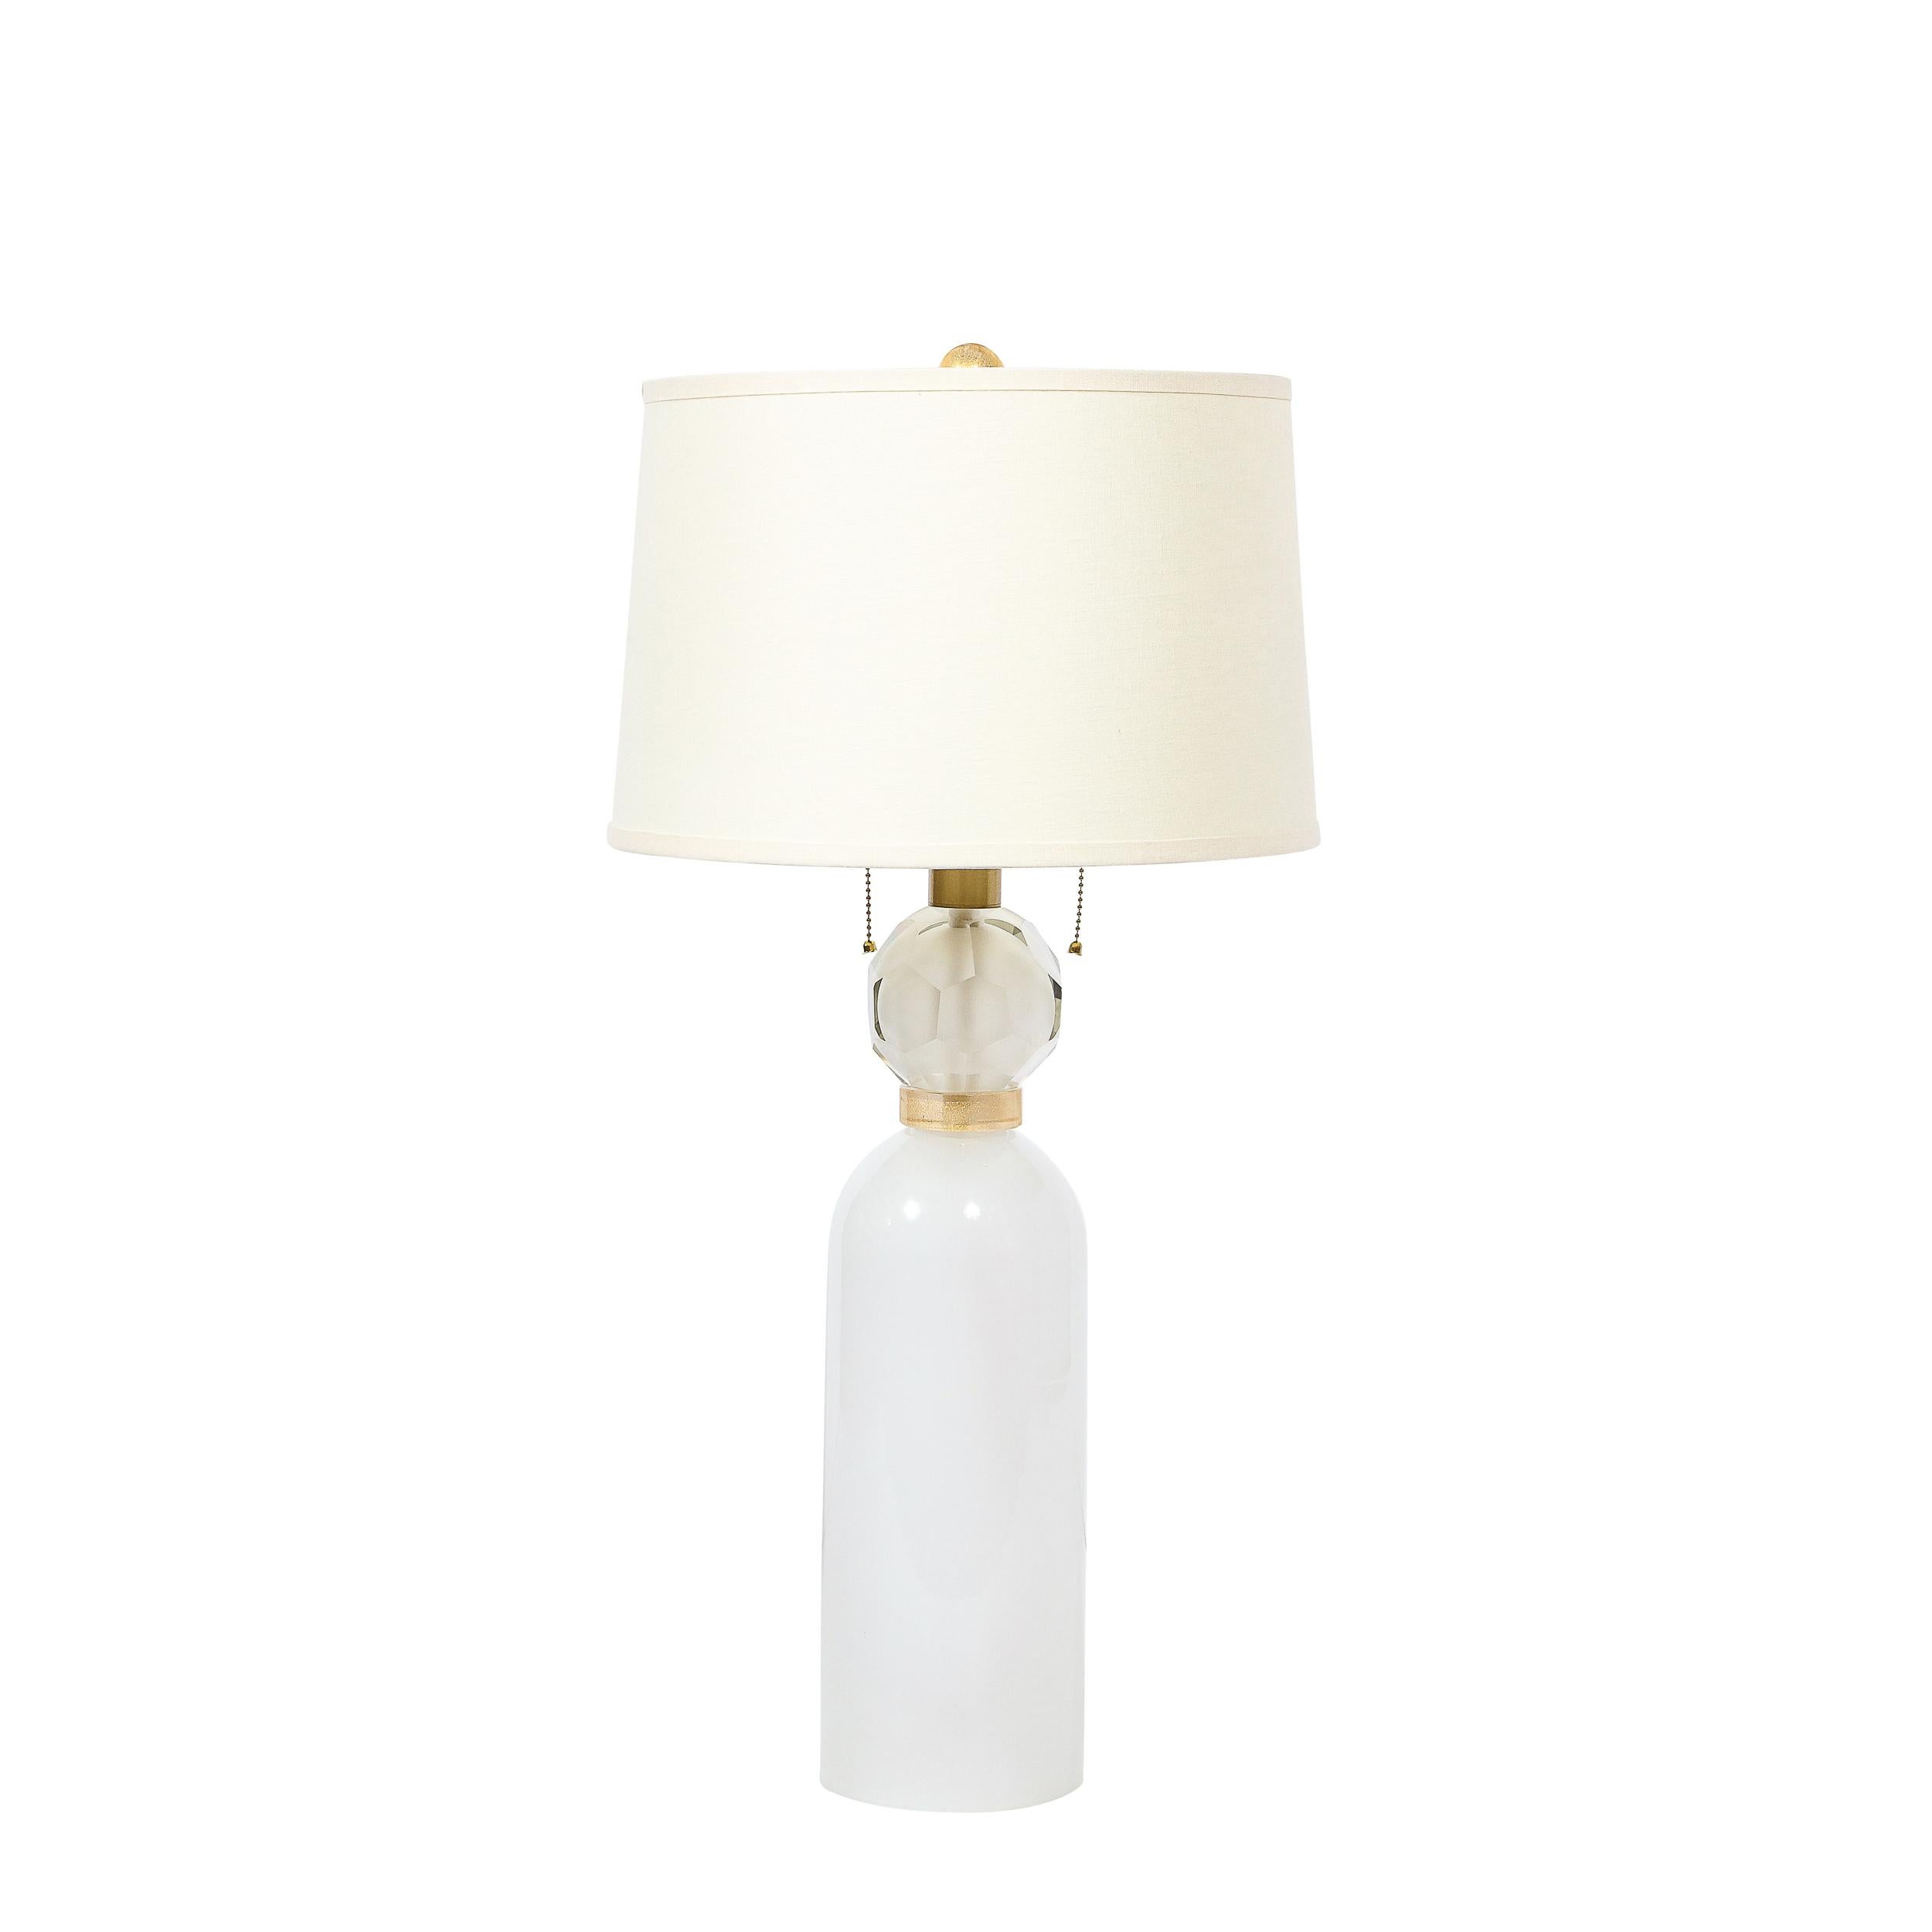 This stunning pair of modernist table lamps were hand blown in Murano- the island off the coast of Venice renowned for centuries for its superlative glass production. They feature cylindrical bullet form bodies that taper at their shoulders where